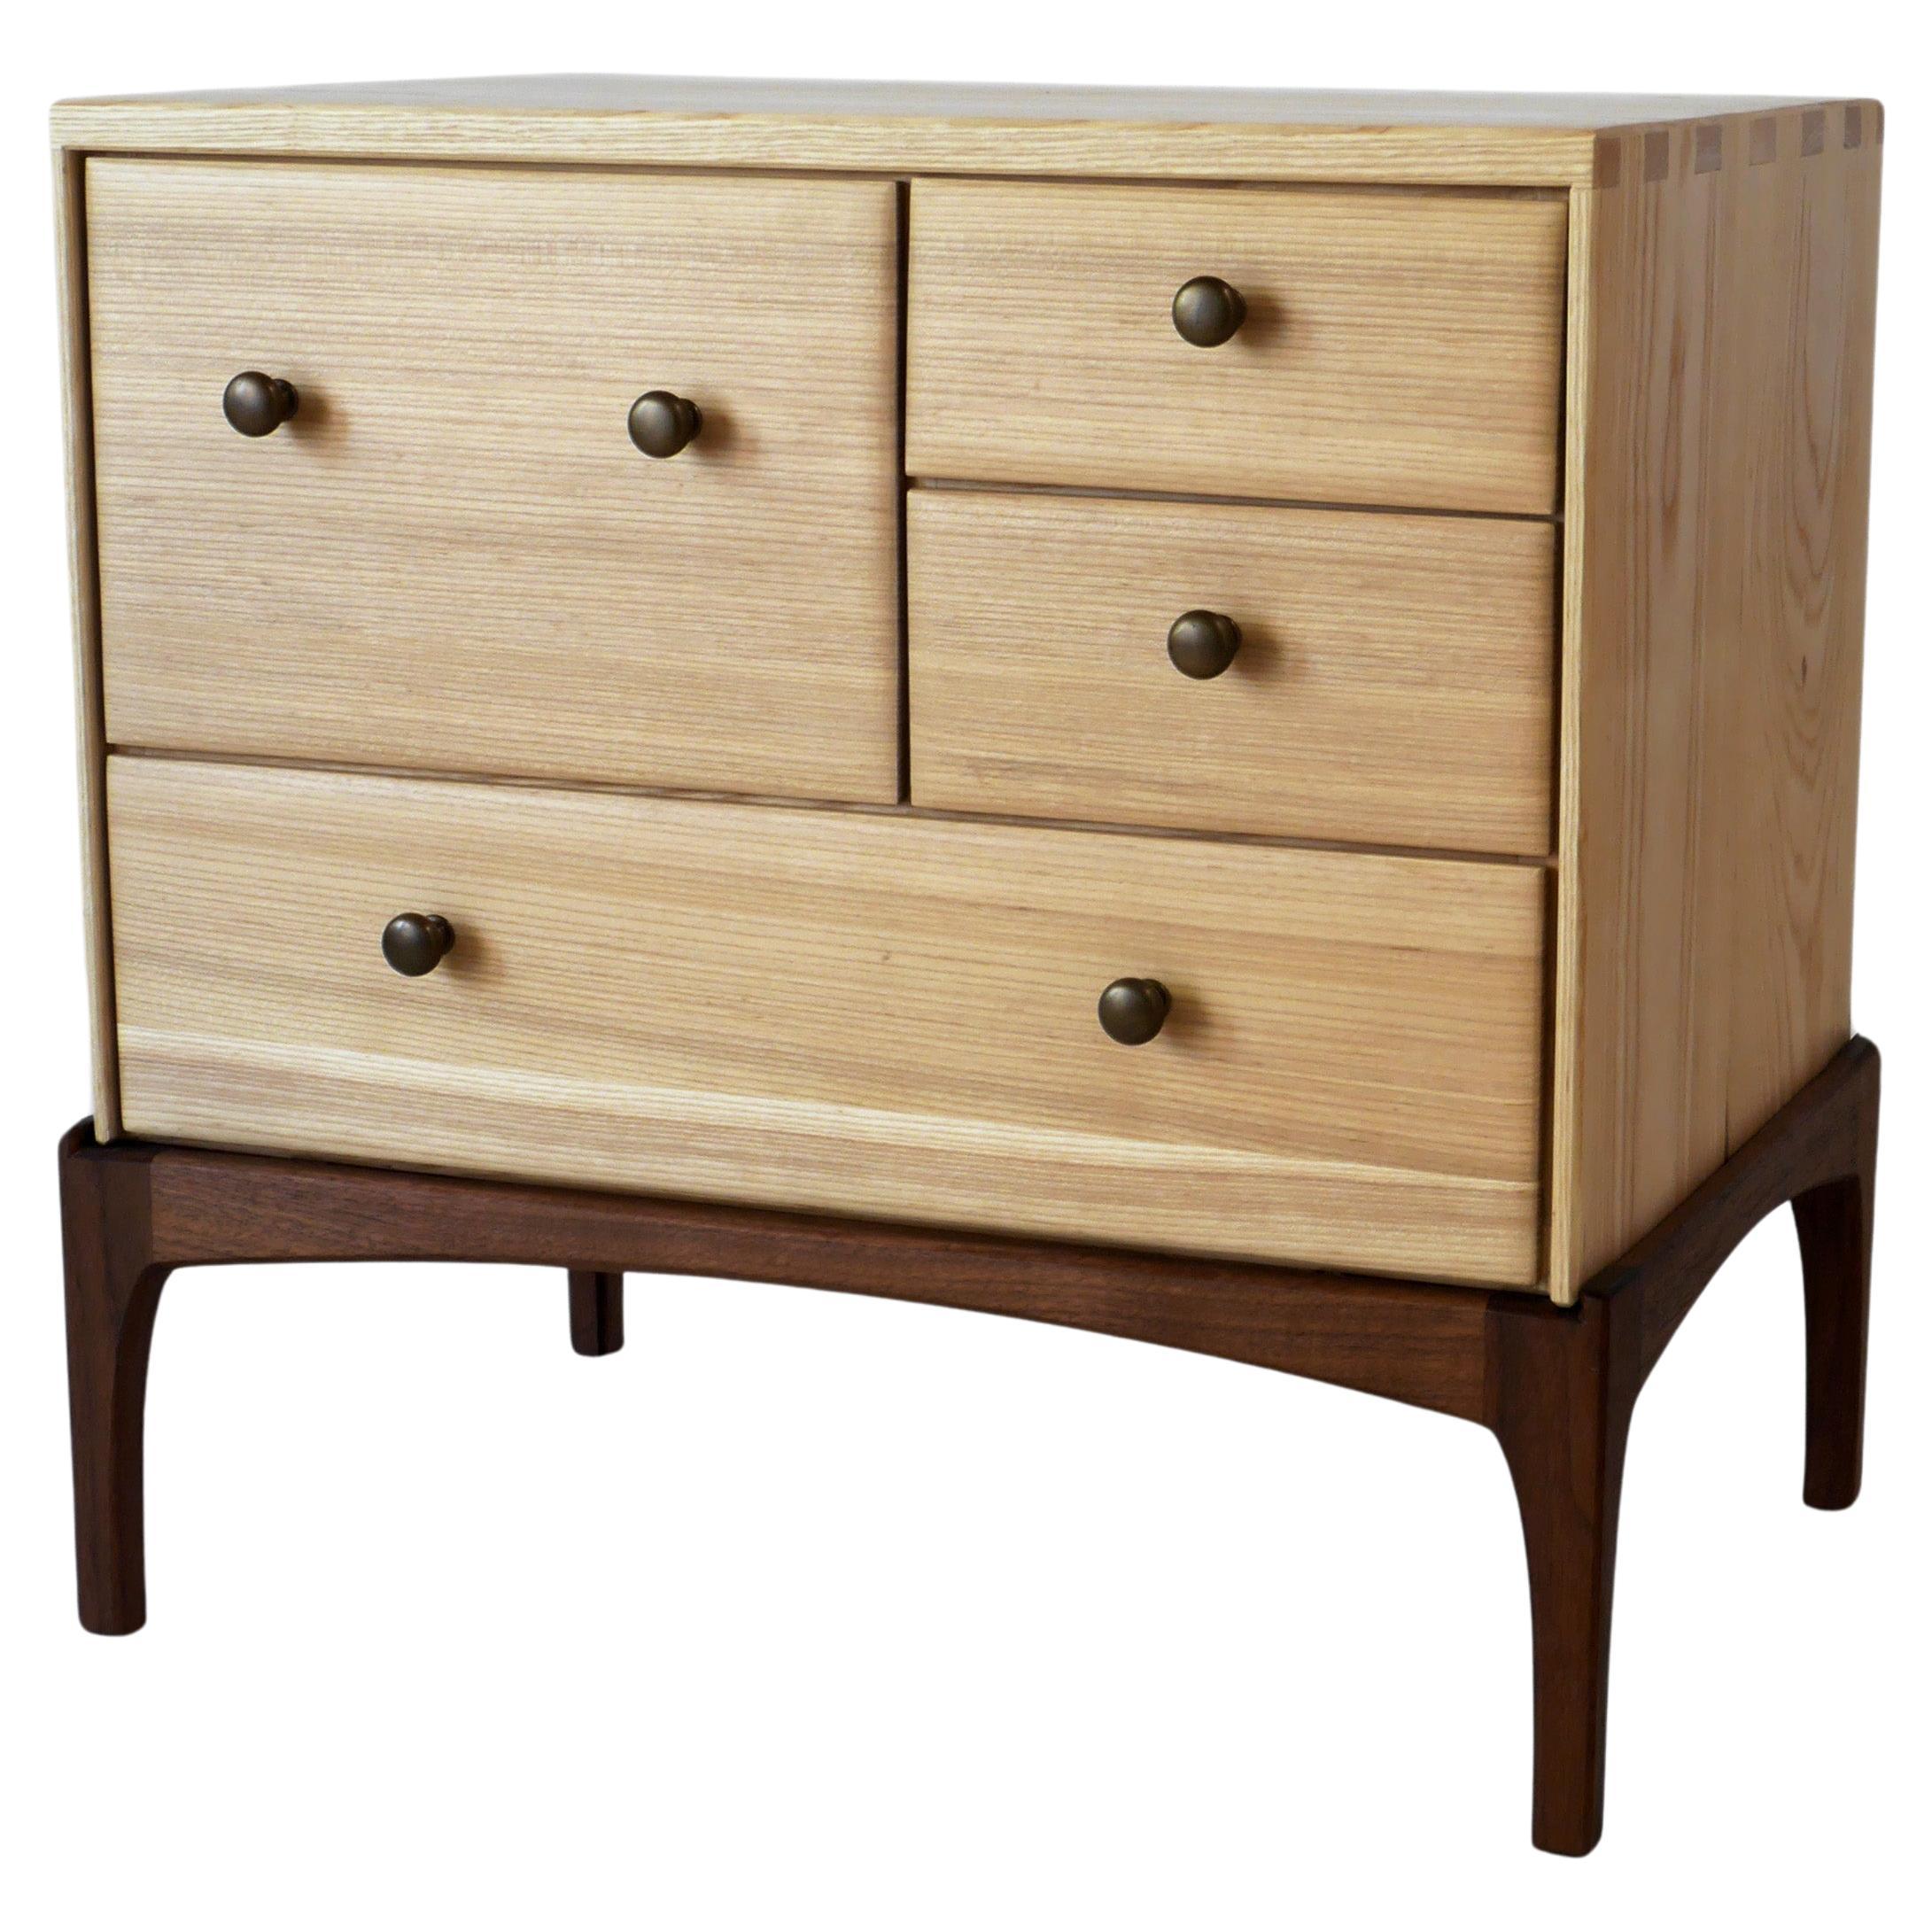 Ash Aurora Nightstand Four Drawer Modern Bedside Table/ Chest of Drawers by Arid